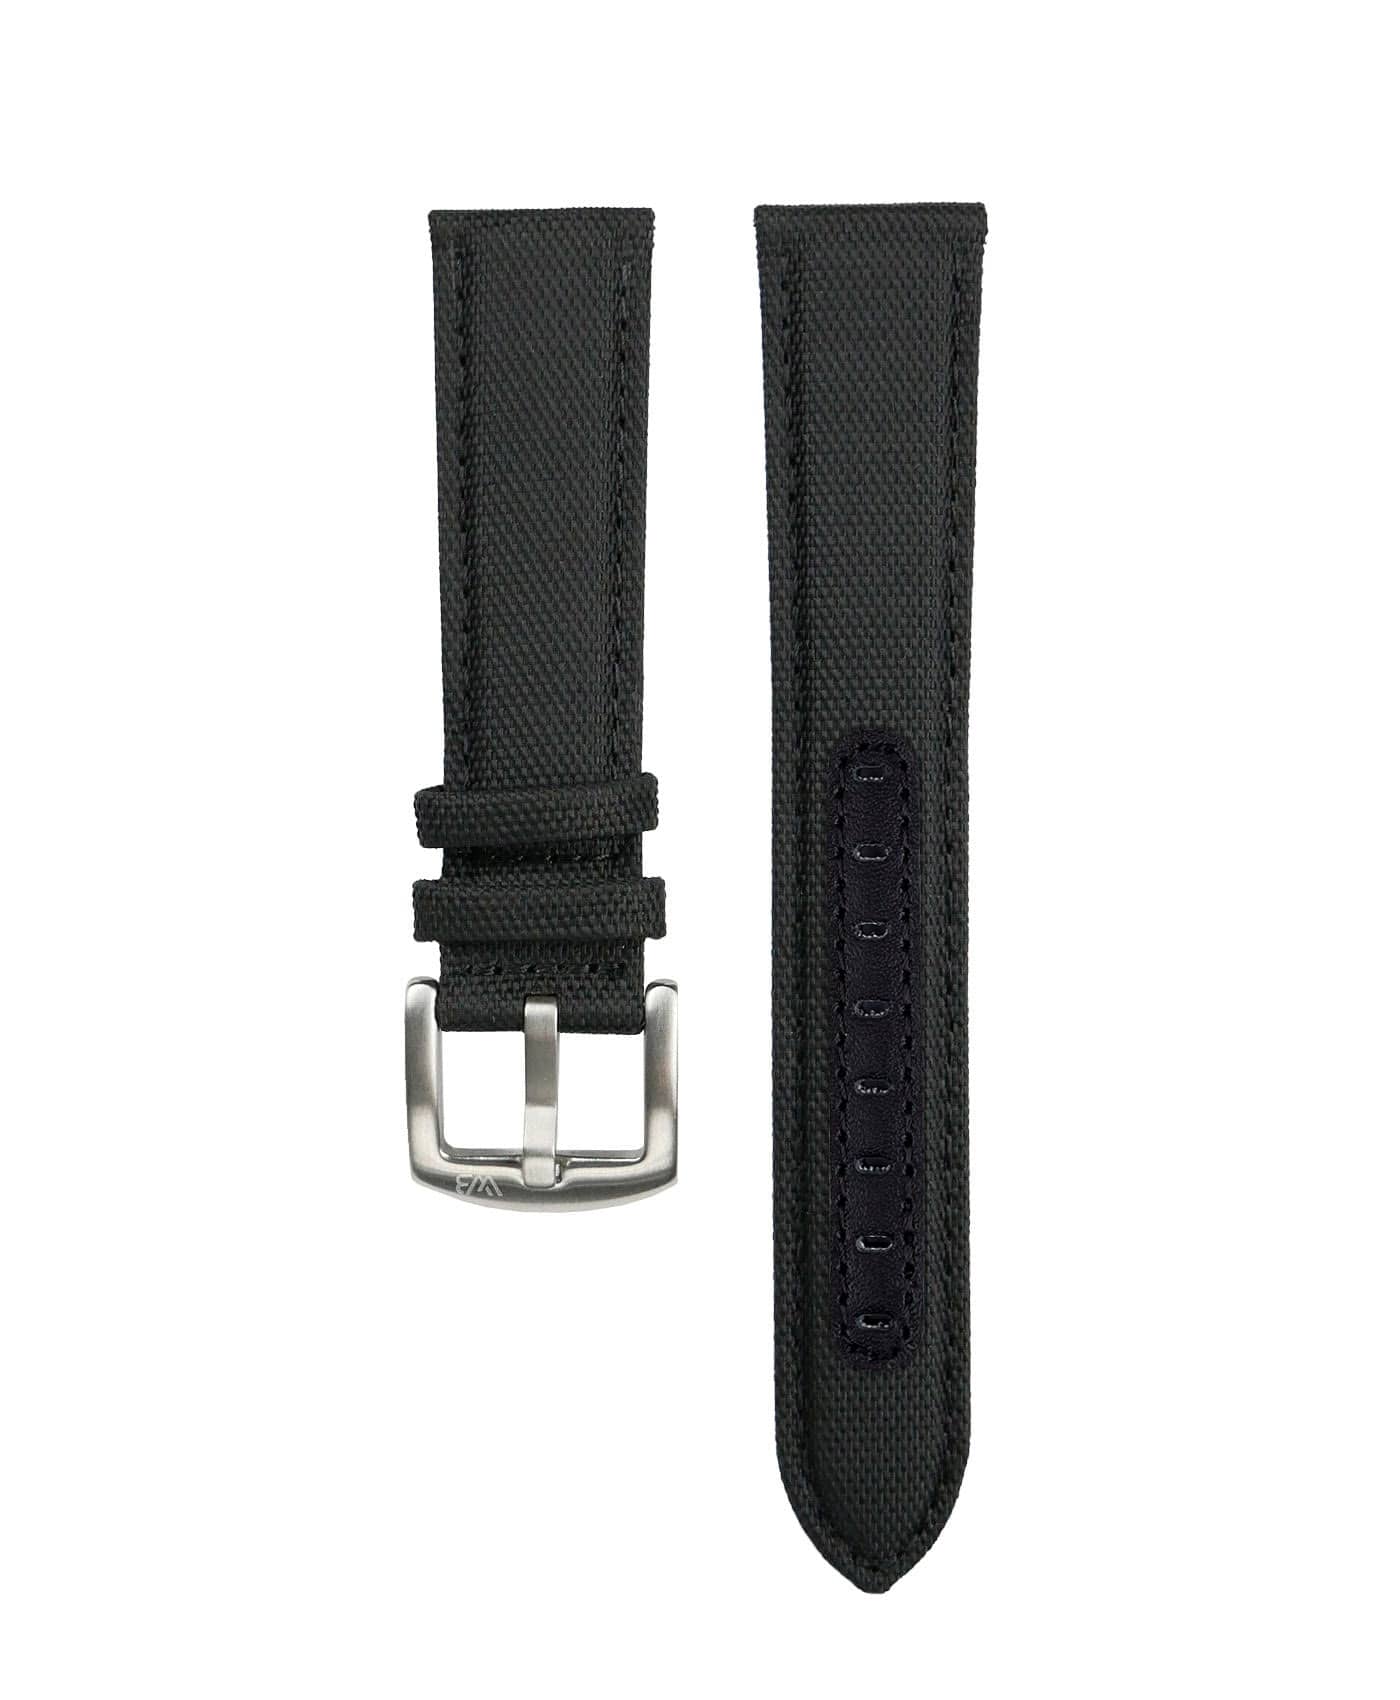 Watch Bands – Quality Replacement Watch Straps by WatchBandit